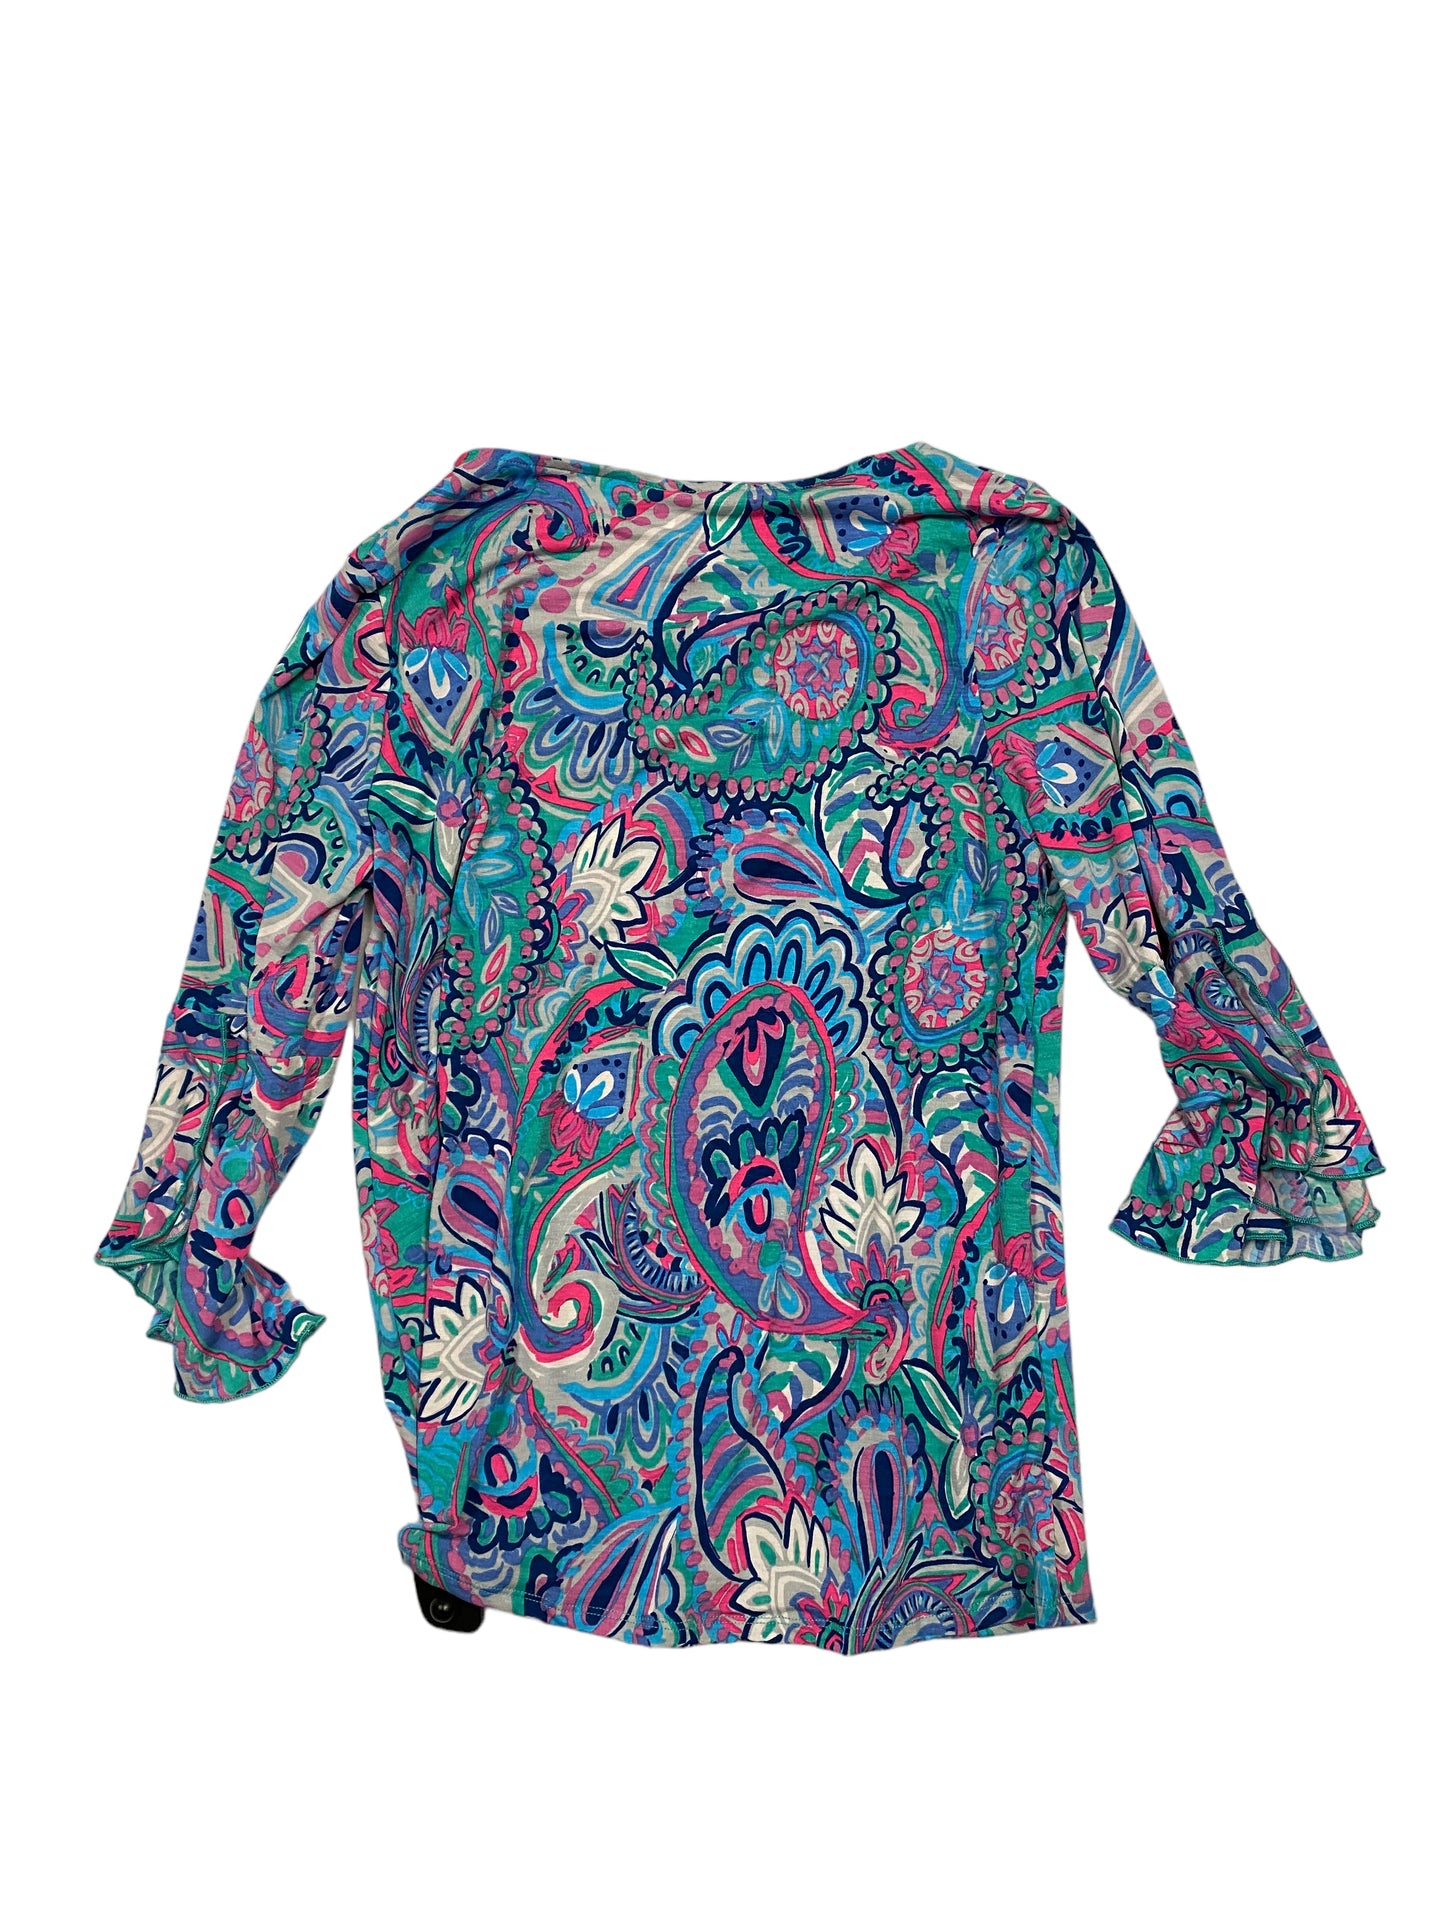 Multi-colored Top Long Sleeve Cmc, Size M